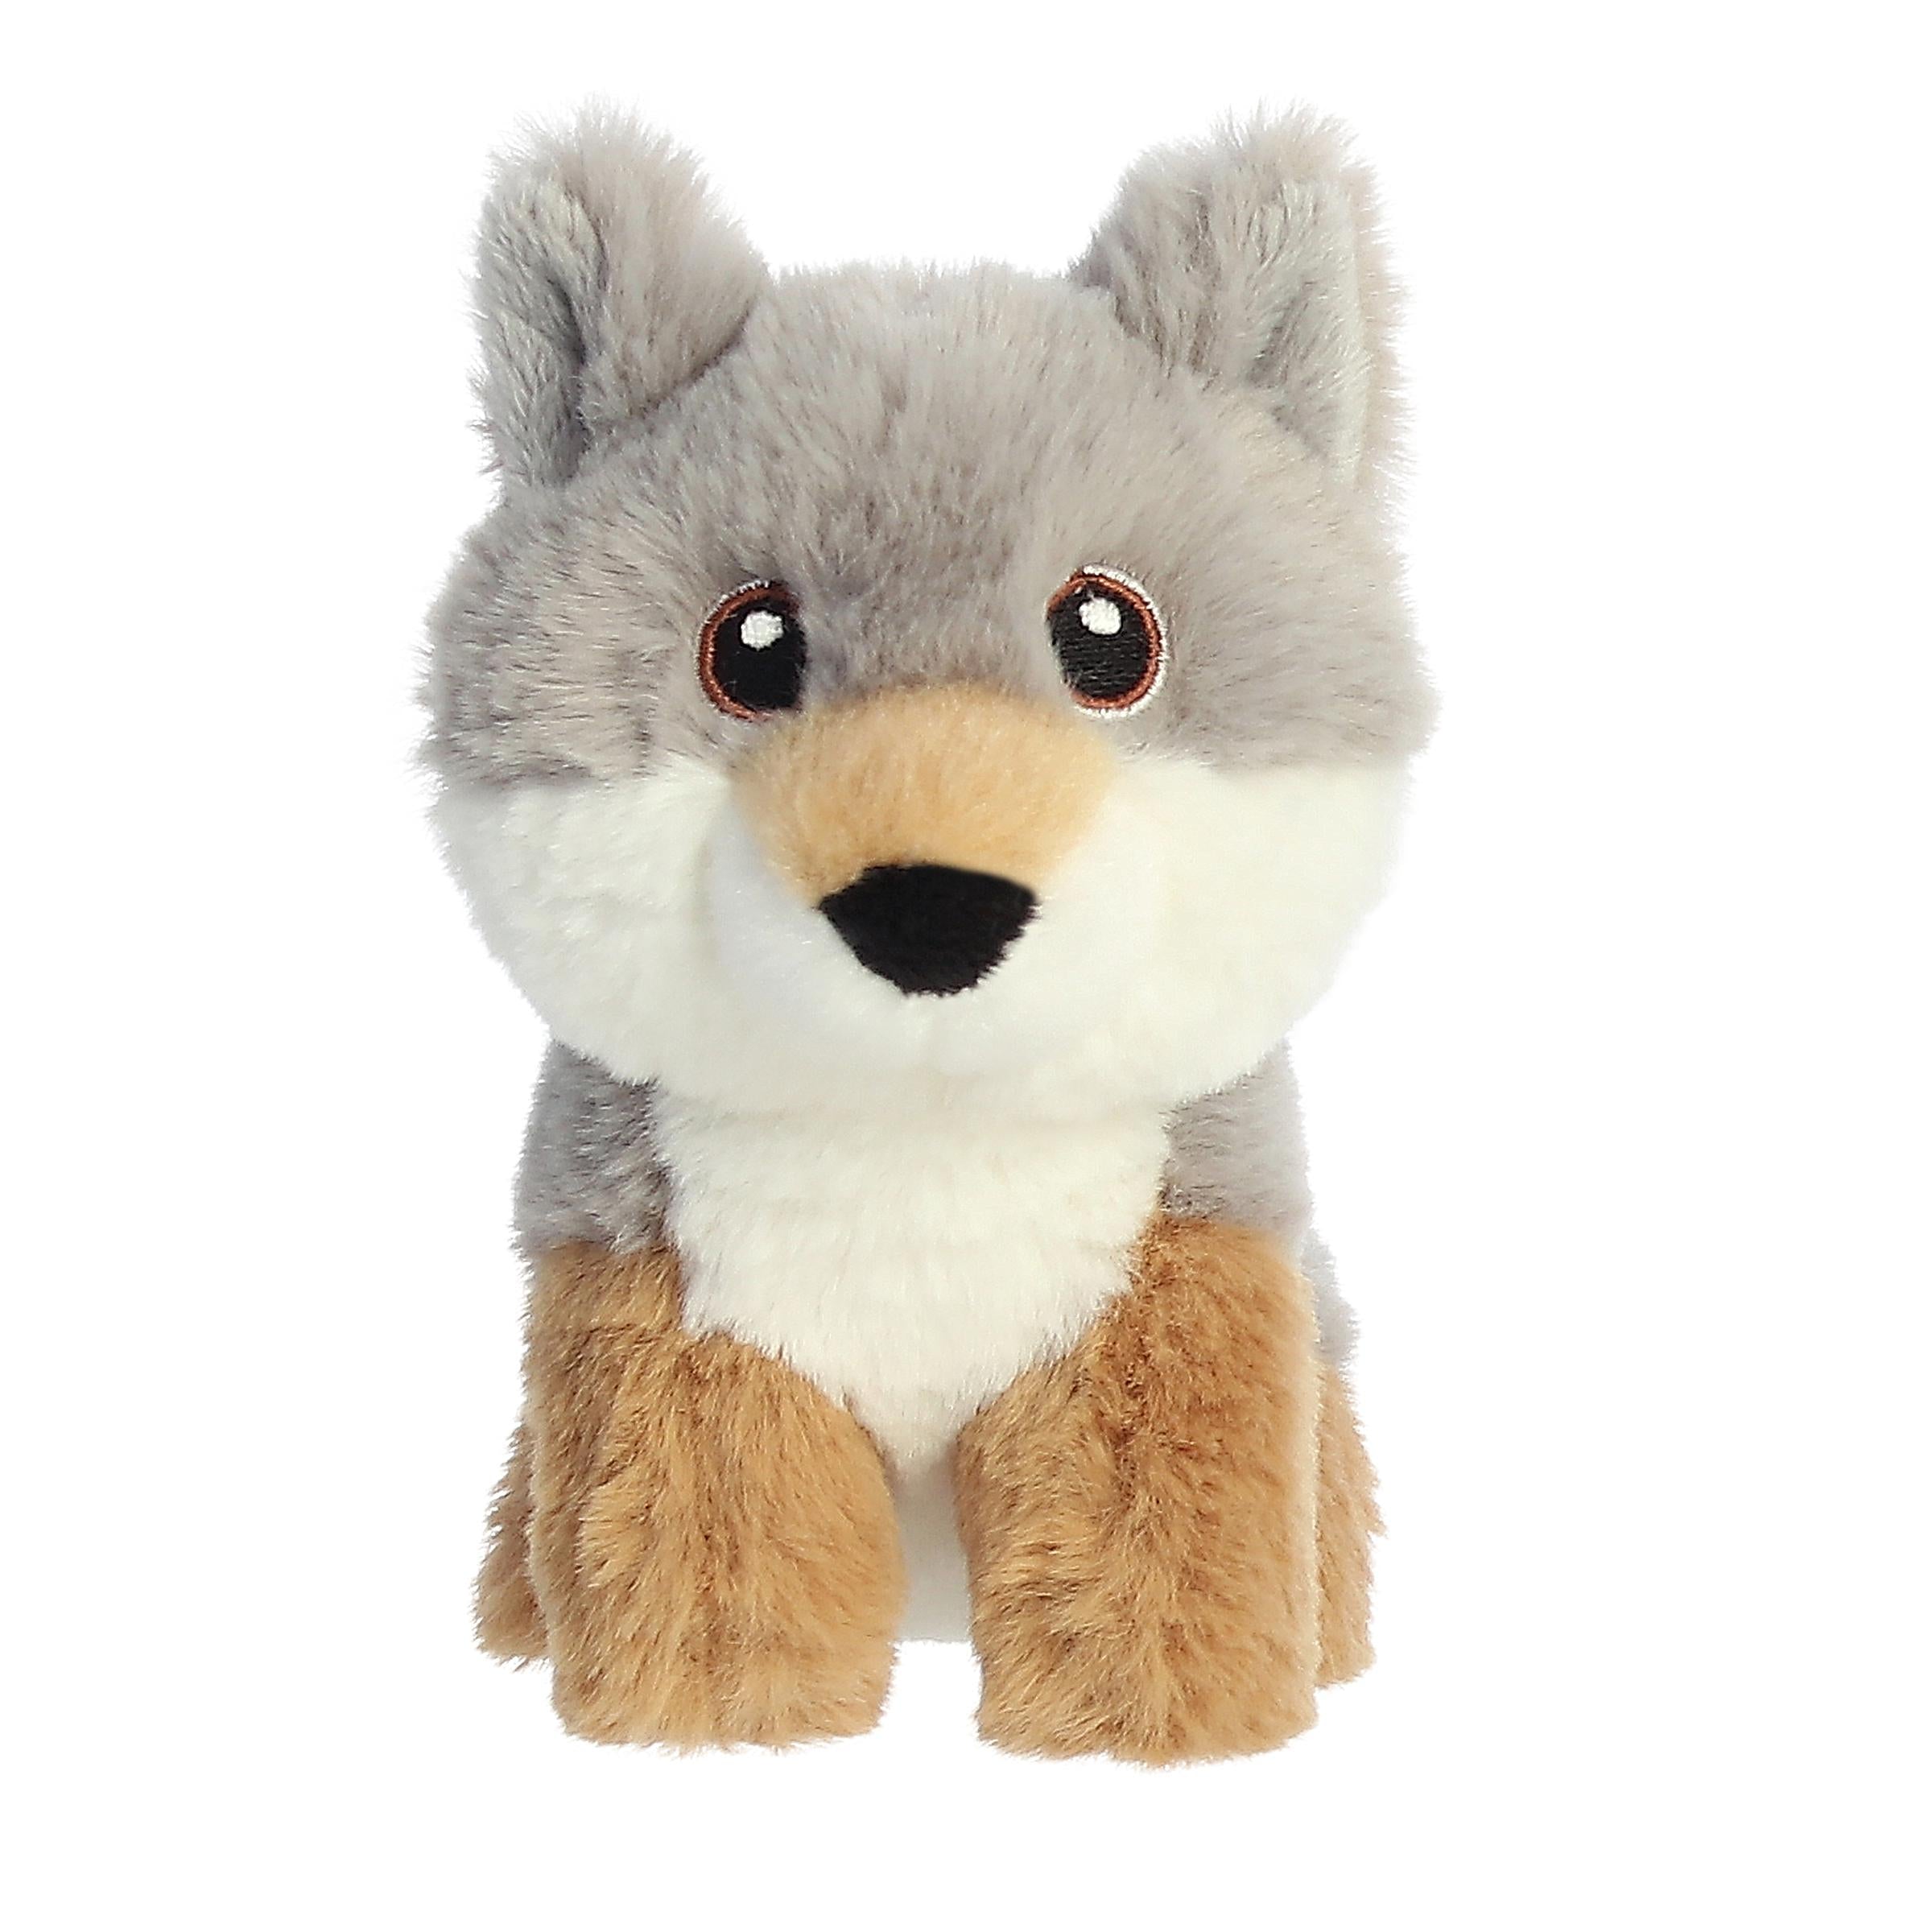 Adorable mini wolf plush with a mixed coat of grey, white, and tan, detailed embroidered eyes, and an eco-nation tag